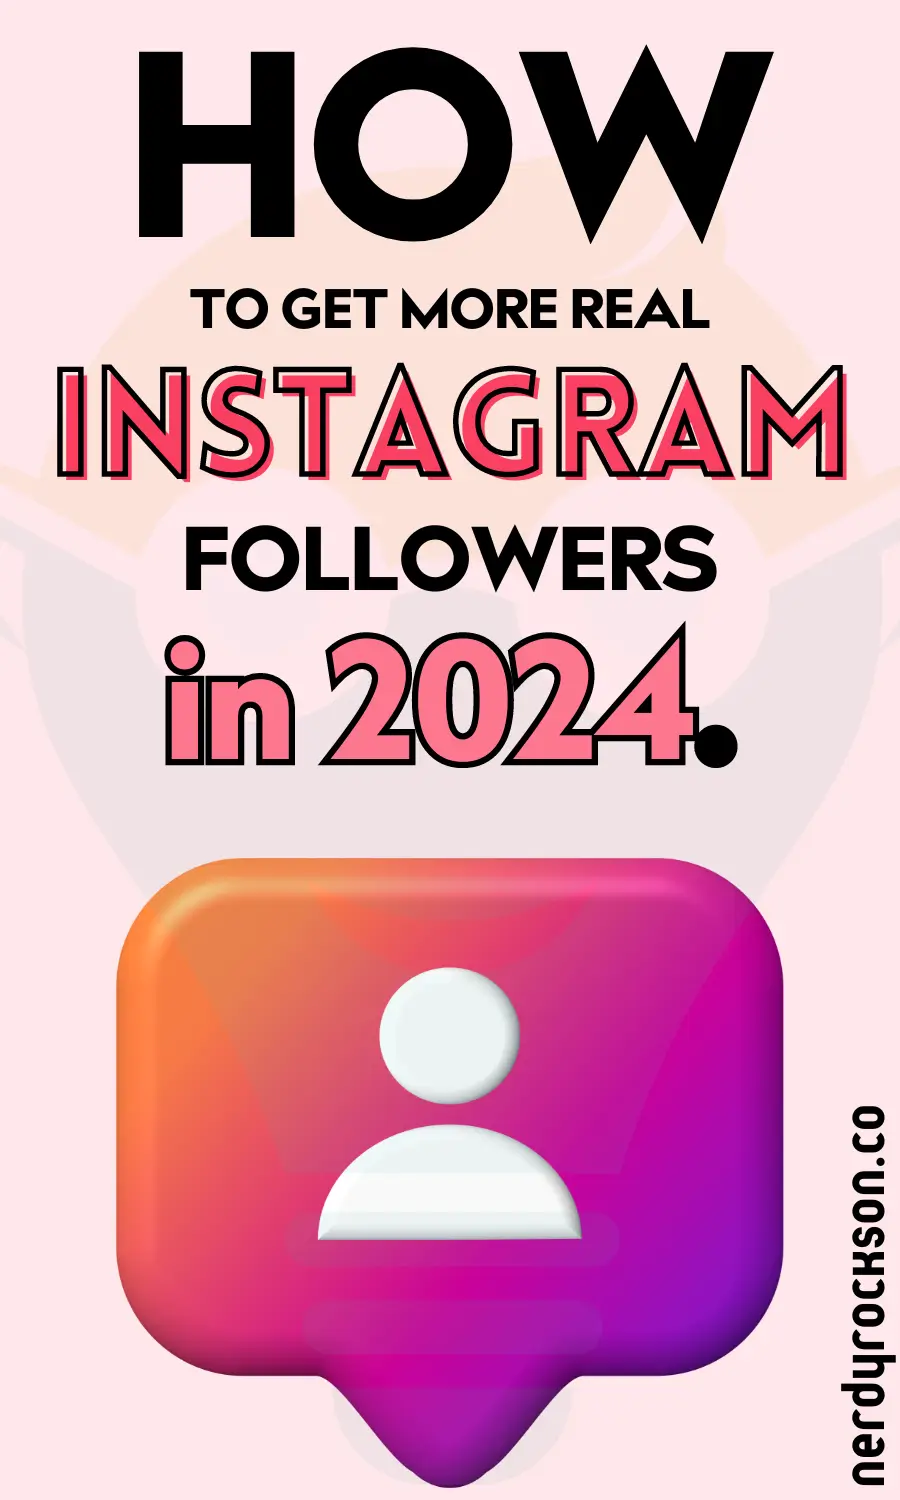 How to Get More REAL Instagram Followers in 2024